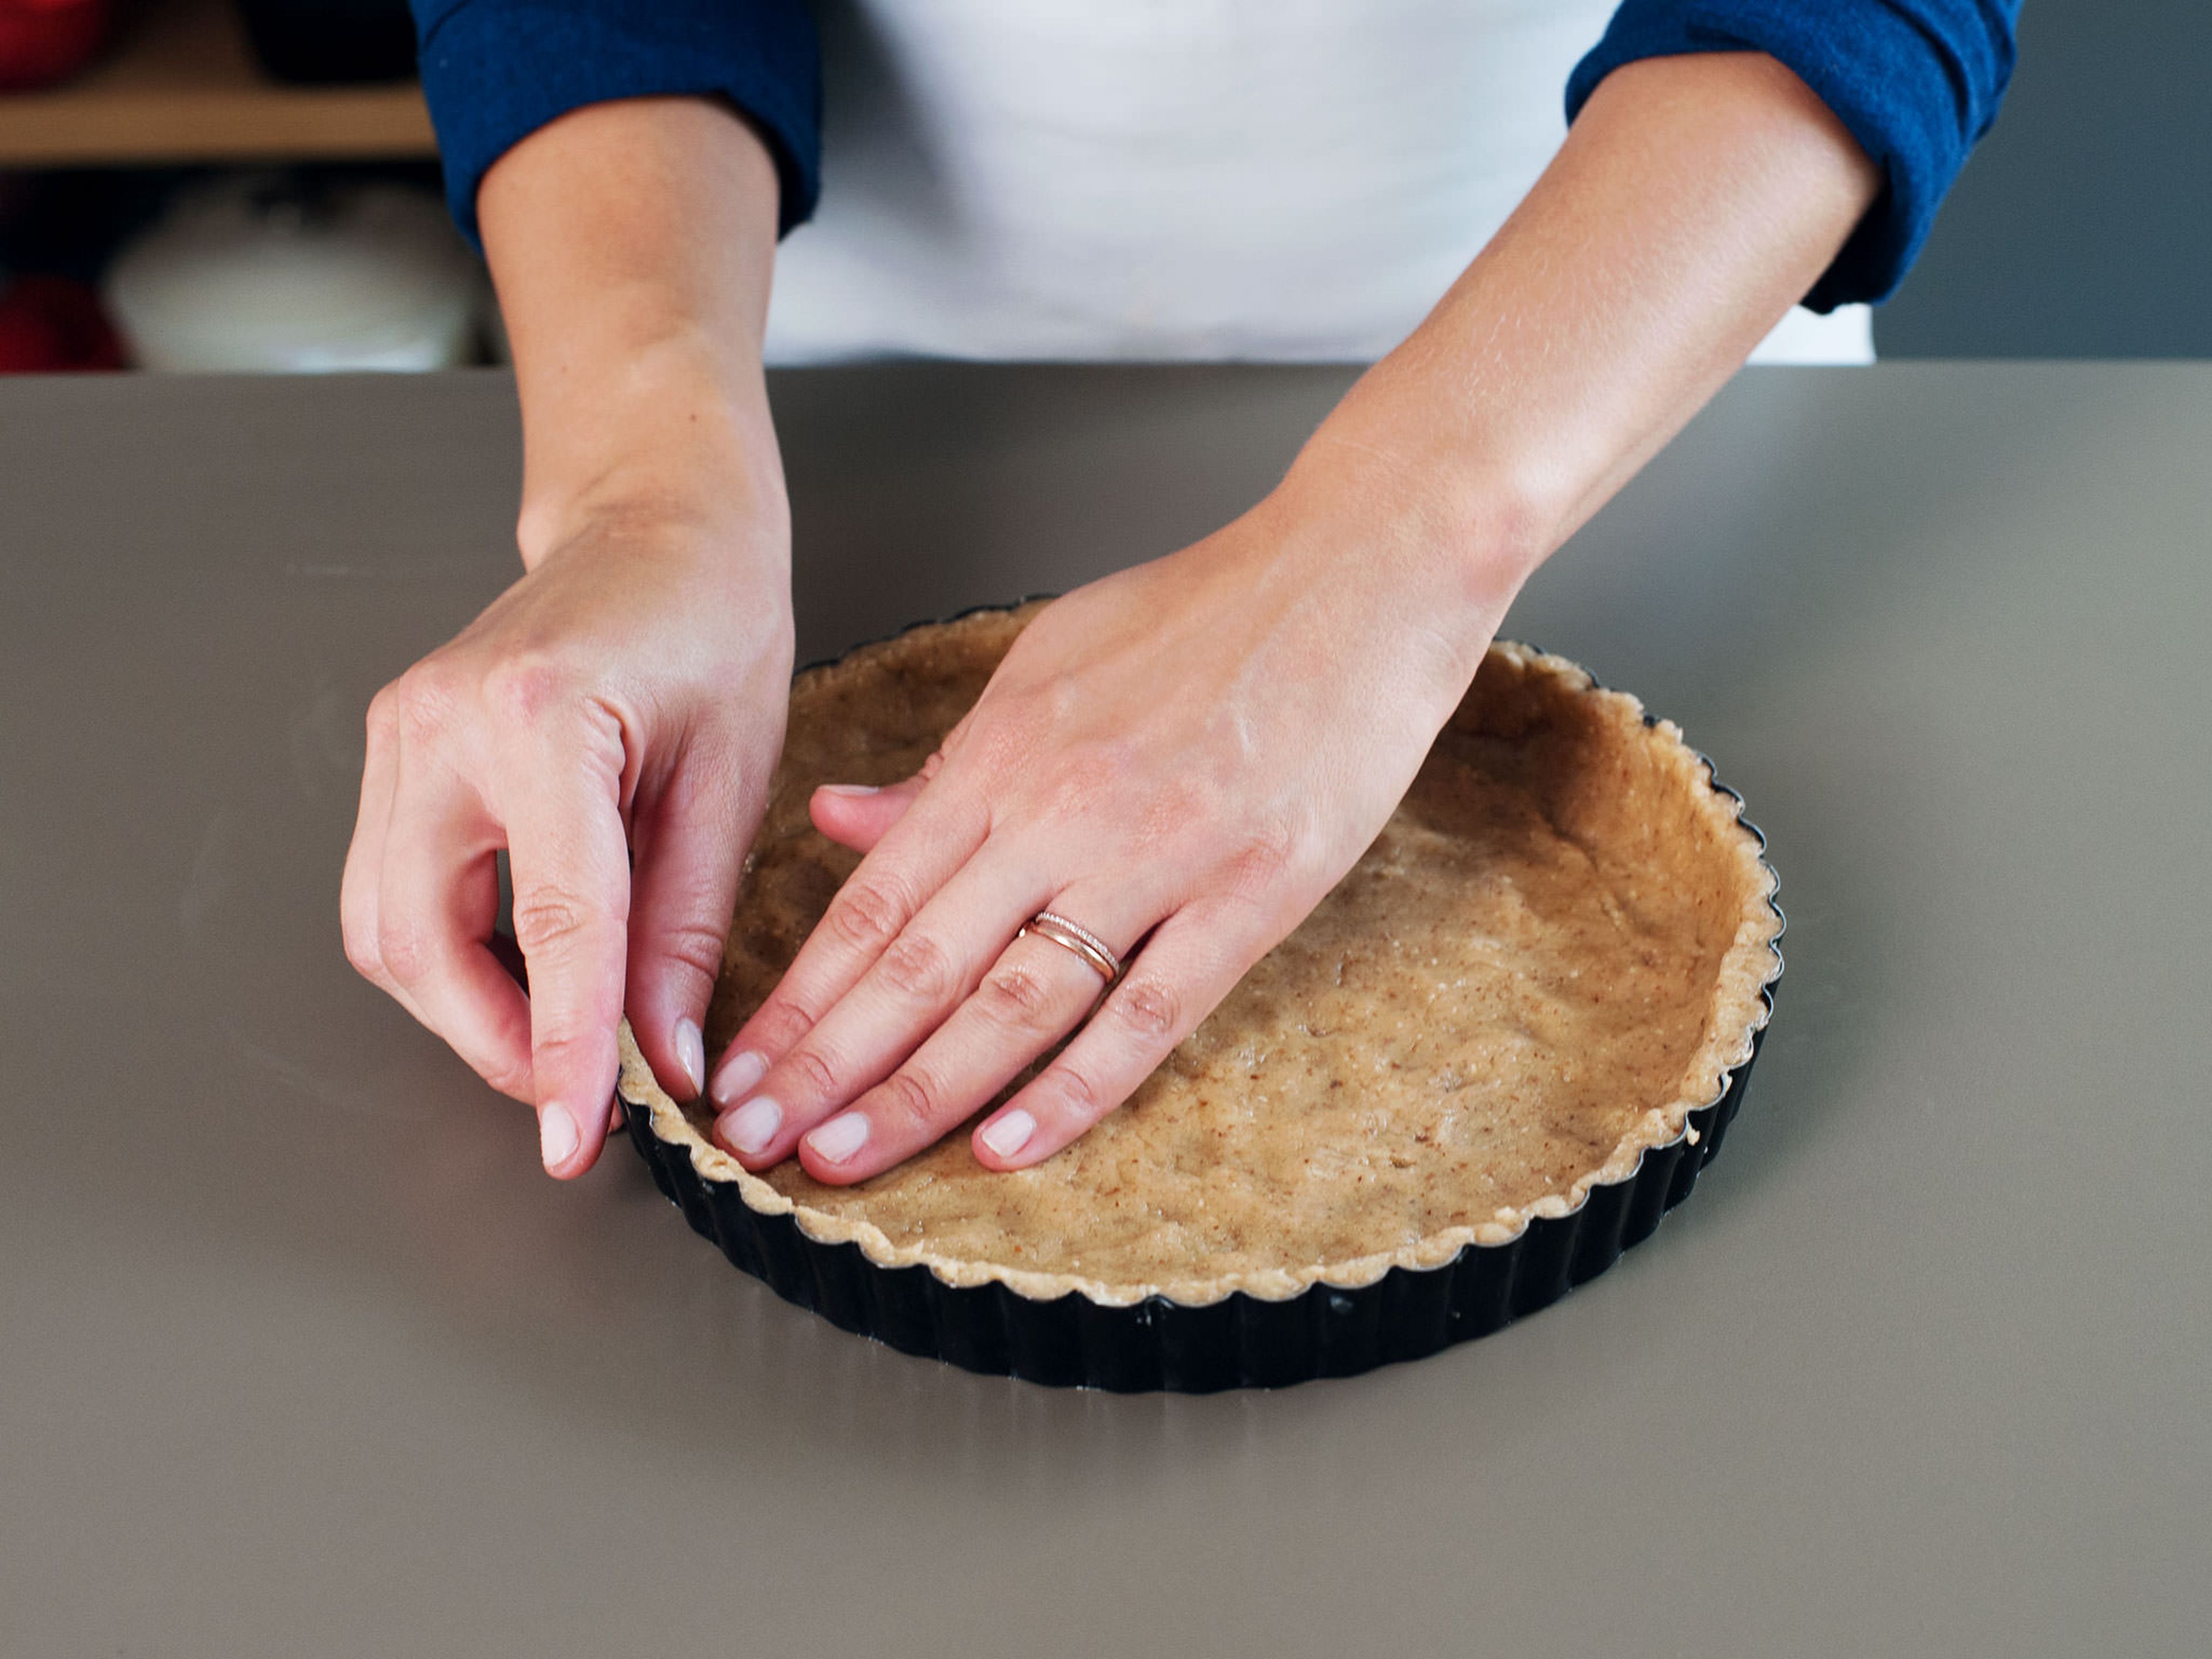 Turn dough out onto a lightly floured surface and knead a couple of times until the dough is smooth. Reserve a third of the dough for the topping and press the remaining dough evenly into tart pan, making sure to press it up the sides and into corners.